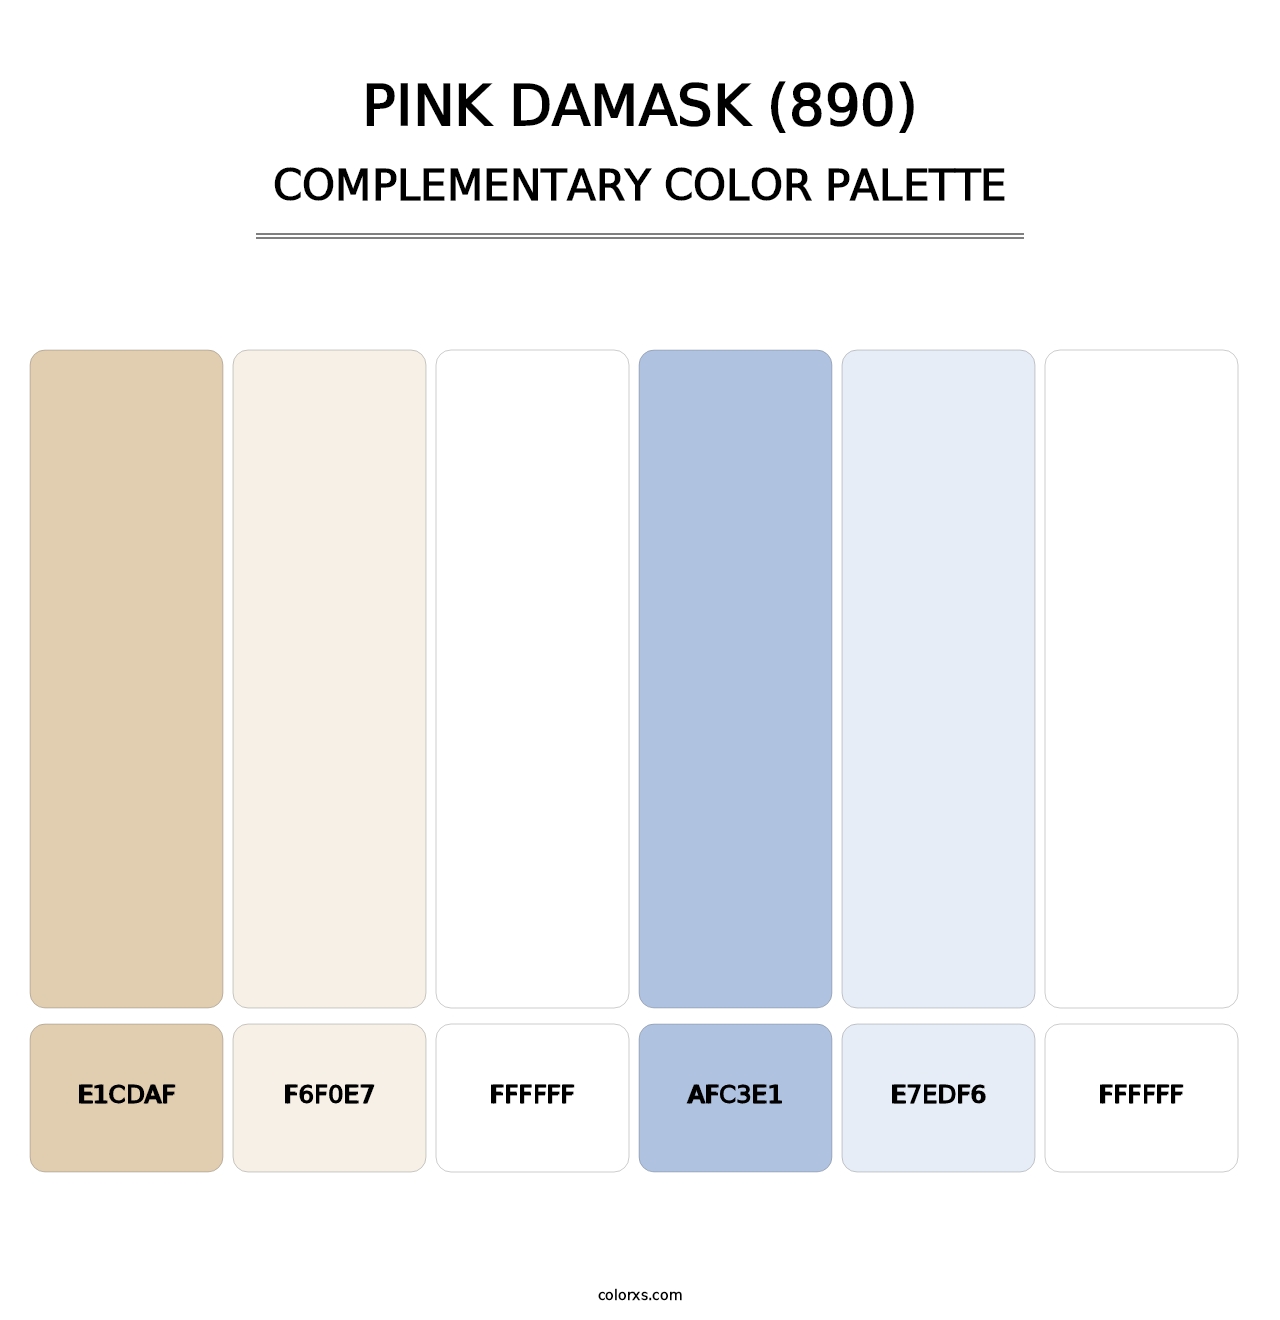 Pink Damask (890) - Complementary Color Palette